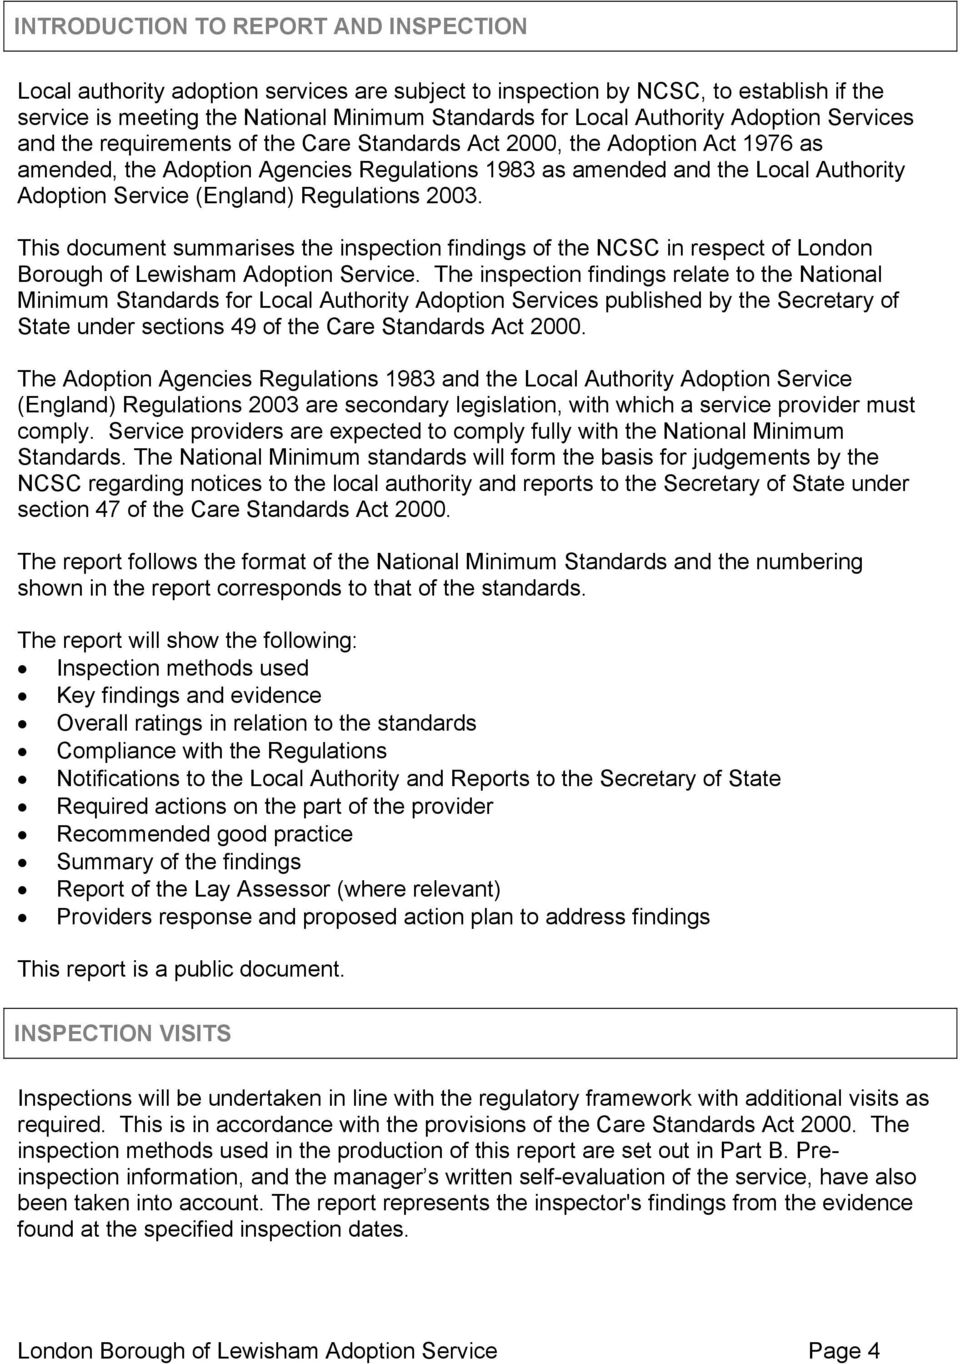 (England) Regulations 2003. This document summarises the inspection findings of the NCSC in respect of London Borough of Lewisham Adoption Service.